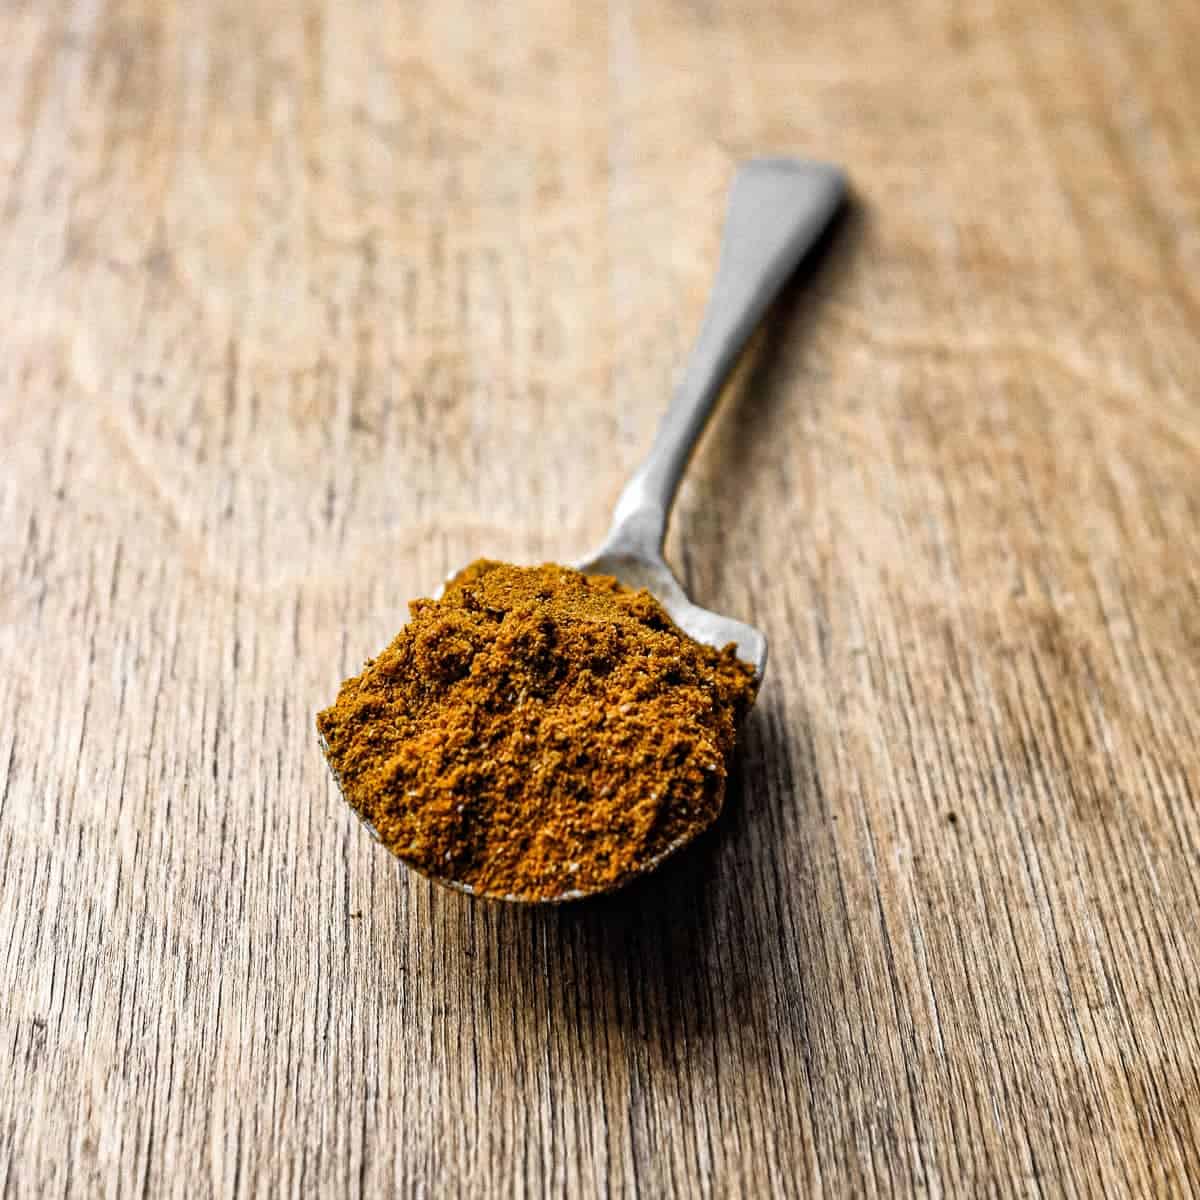 A teaspoon filled with Madras Curry Powder on a wooden surface